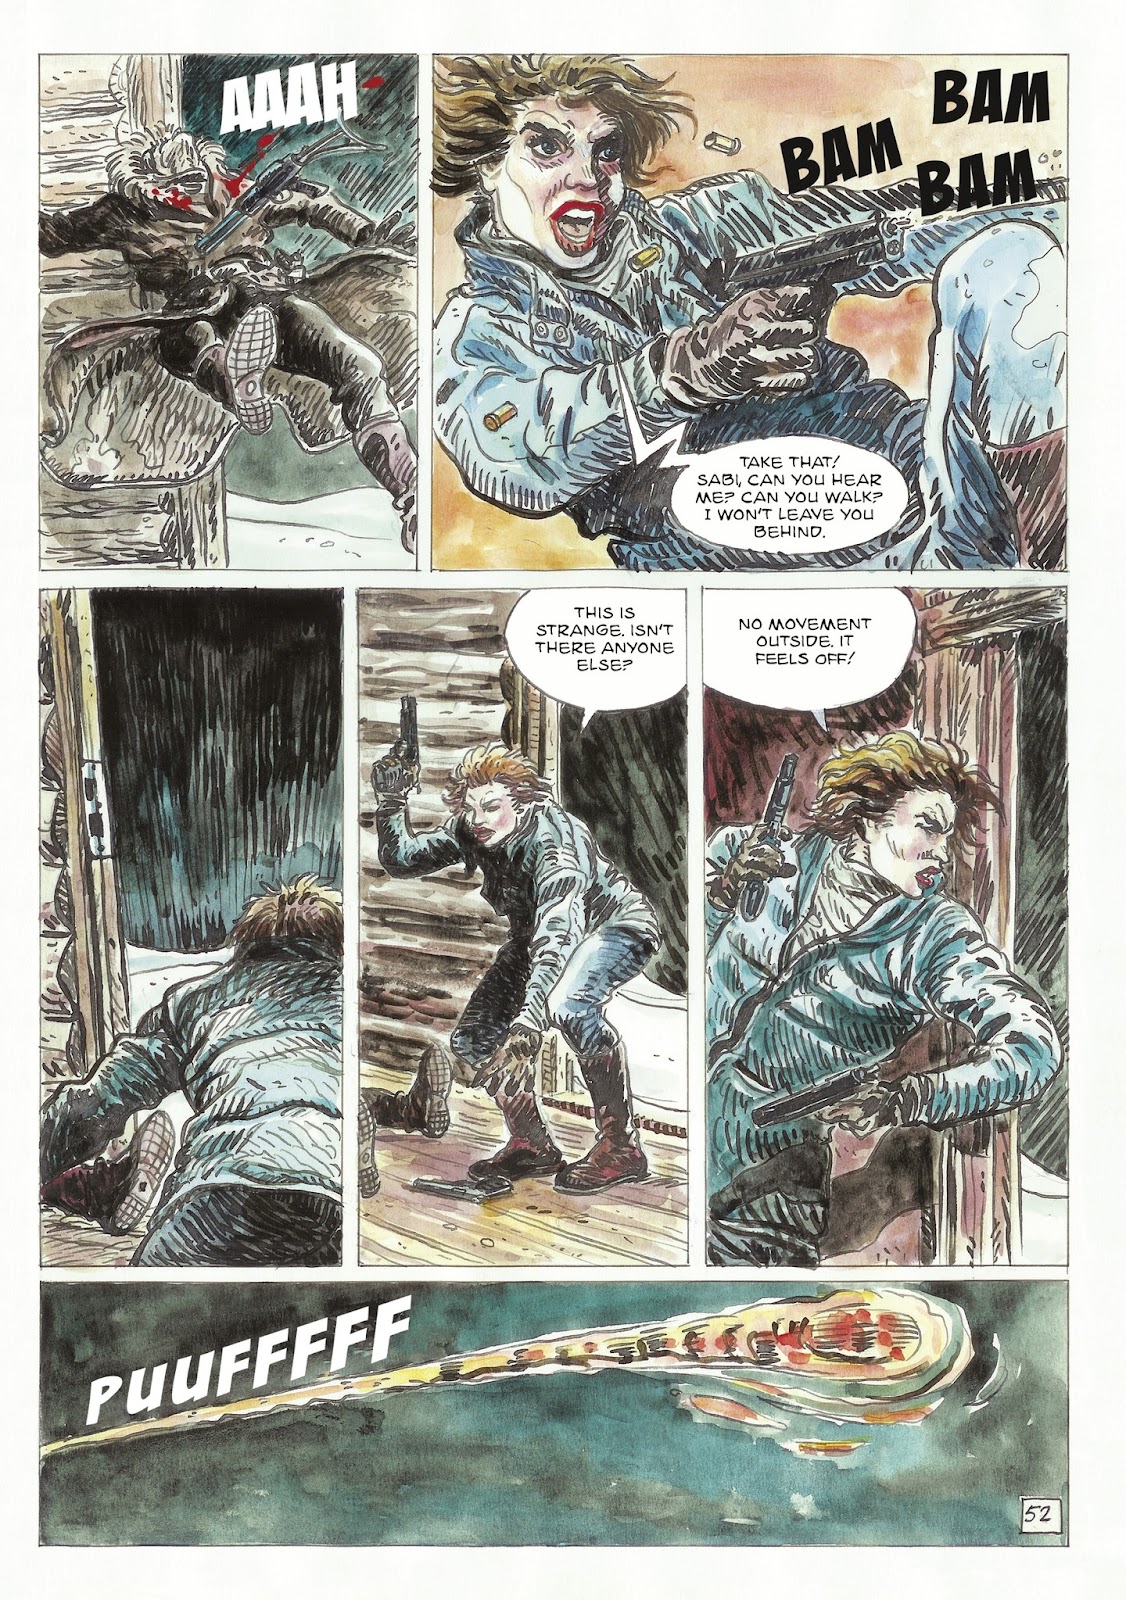 The Man With the Bear issue 1 - Page 54